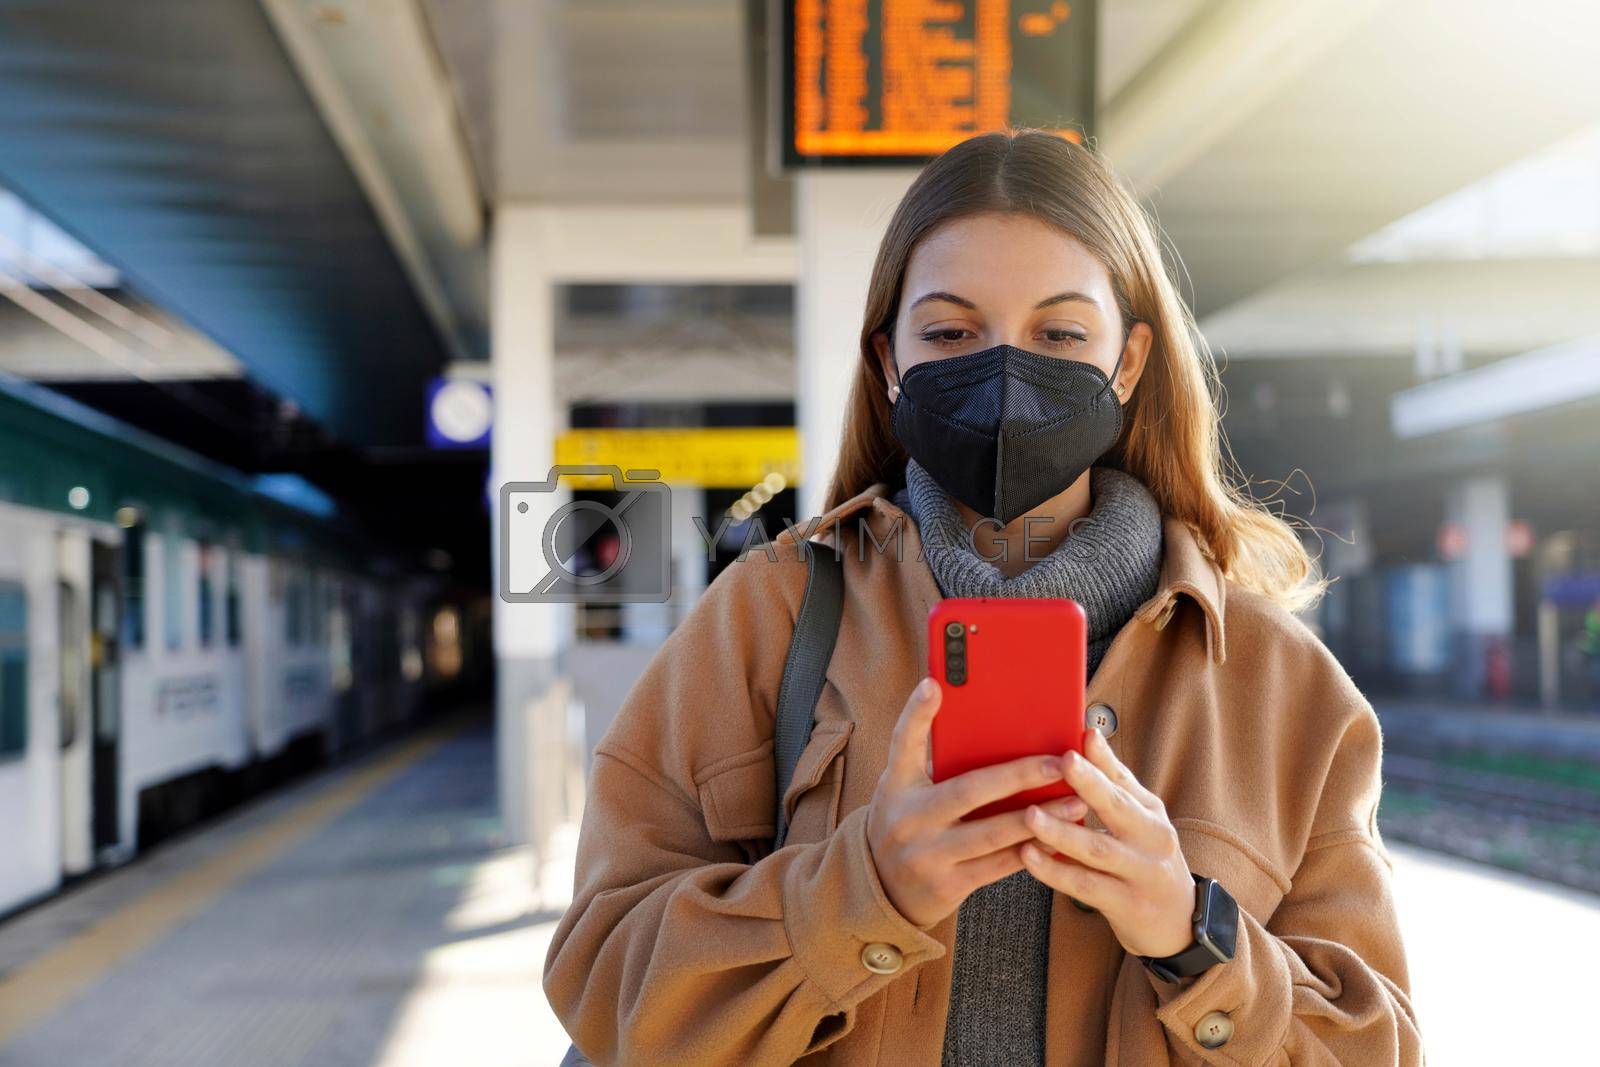 Stylish urban woman wearing black face mask KN95 FFP2 texting on smartphone in train station